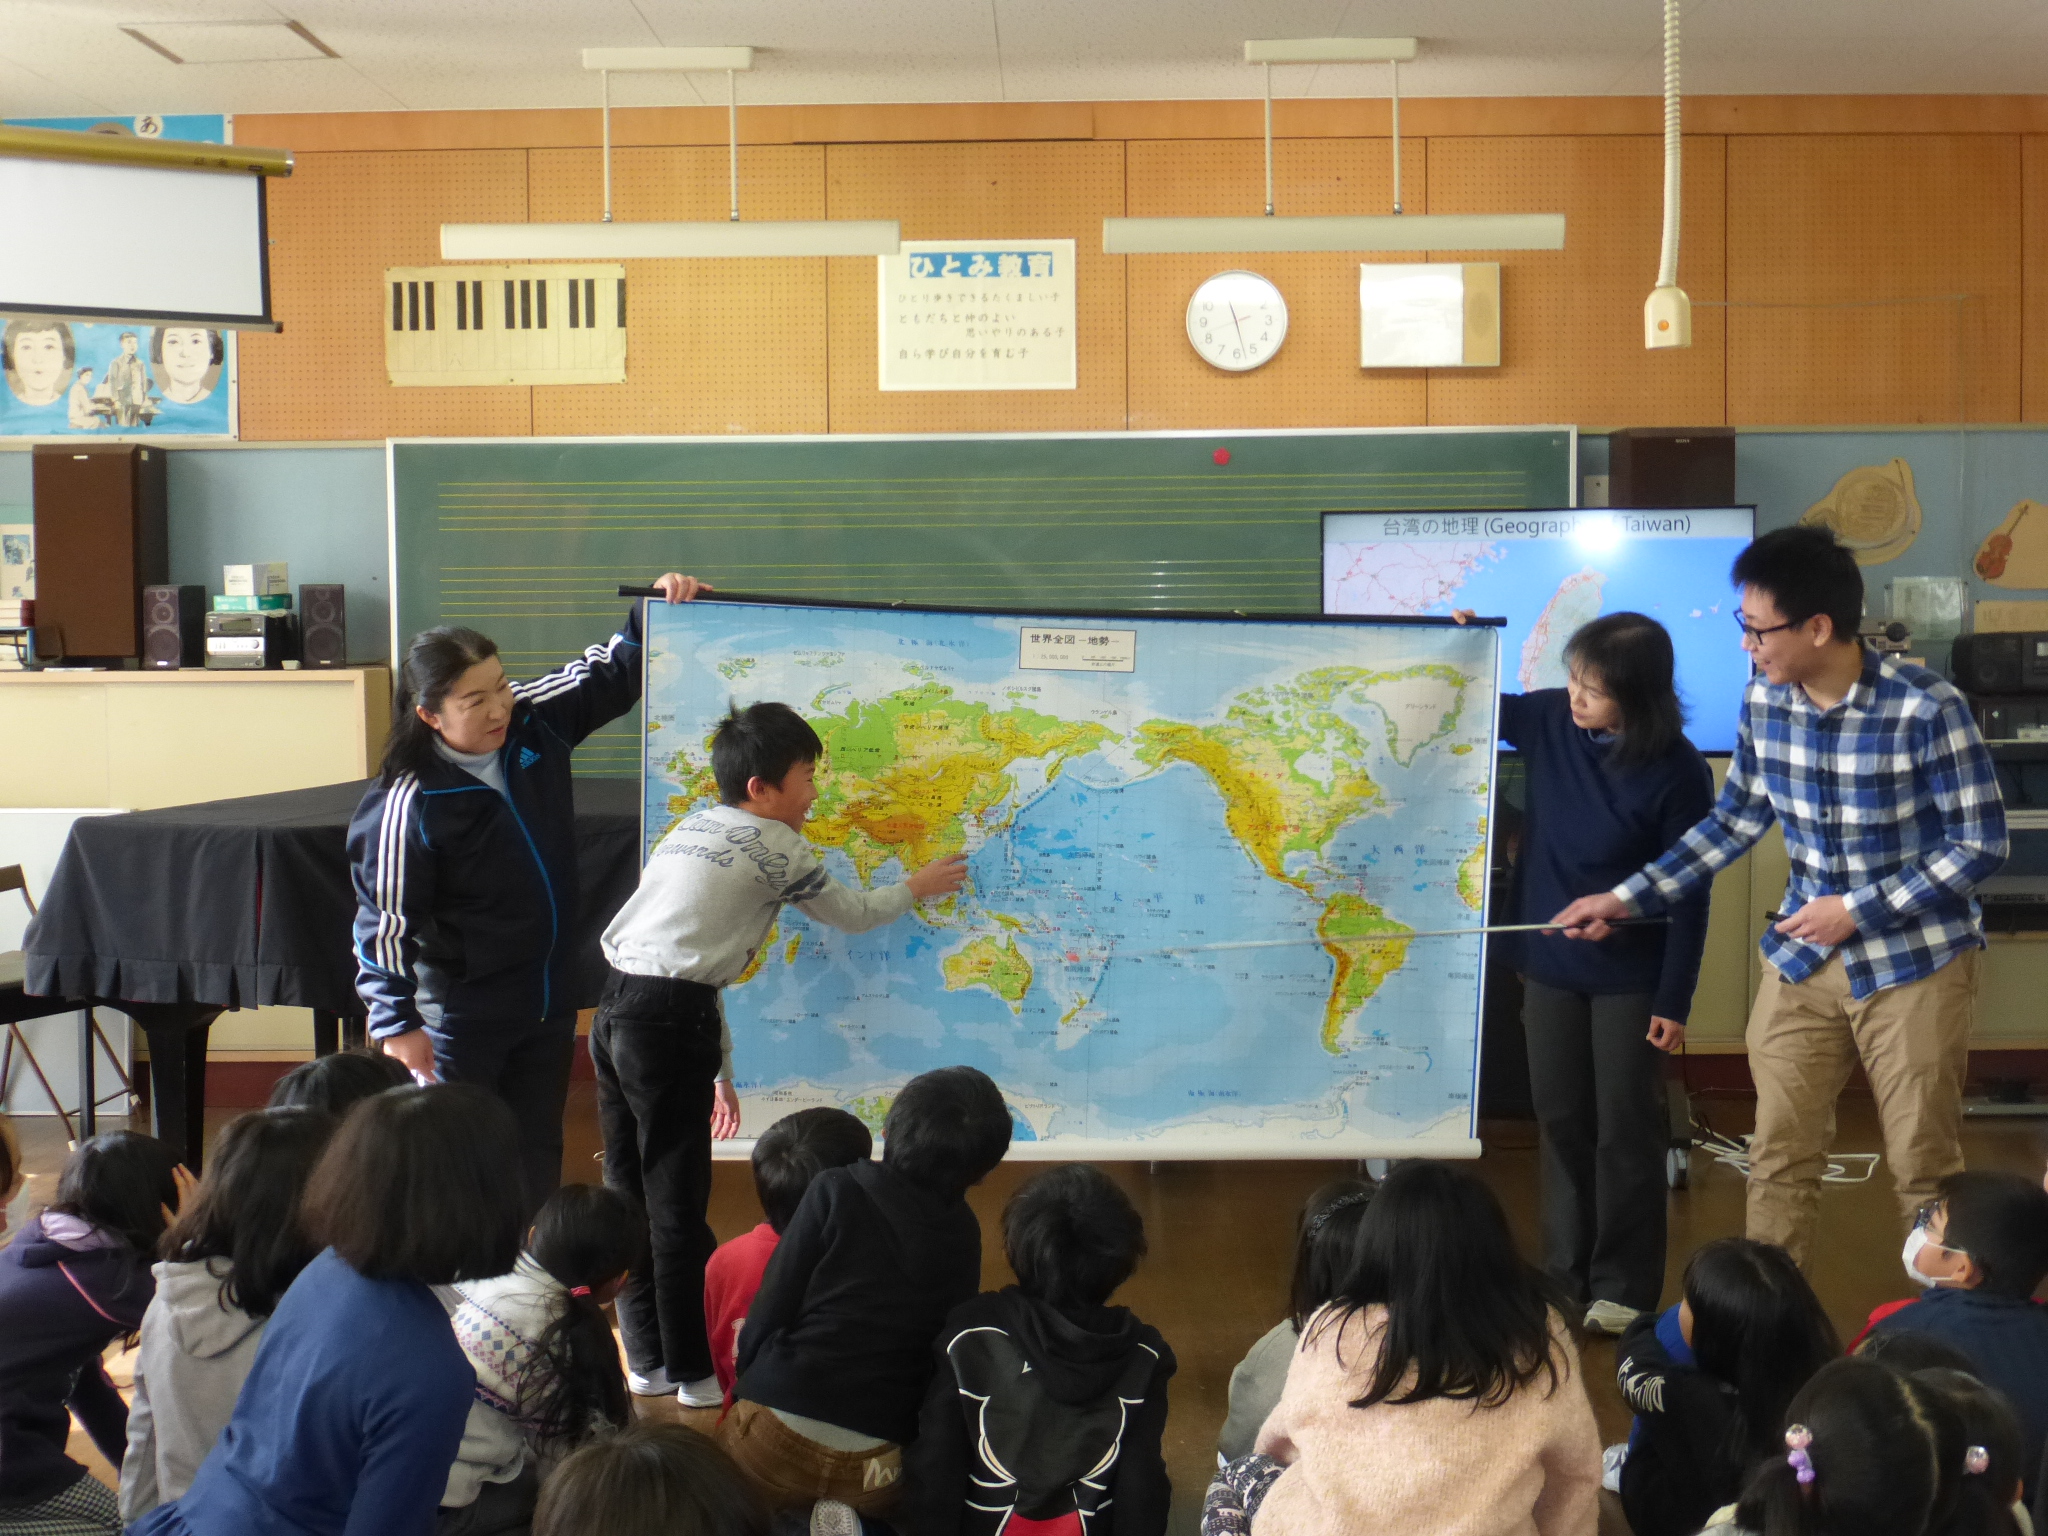 International students at UoA introduced their home cultures at Ikki Elementary school